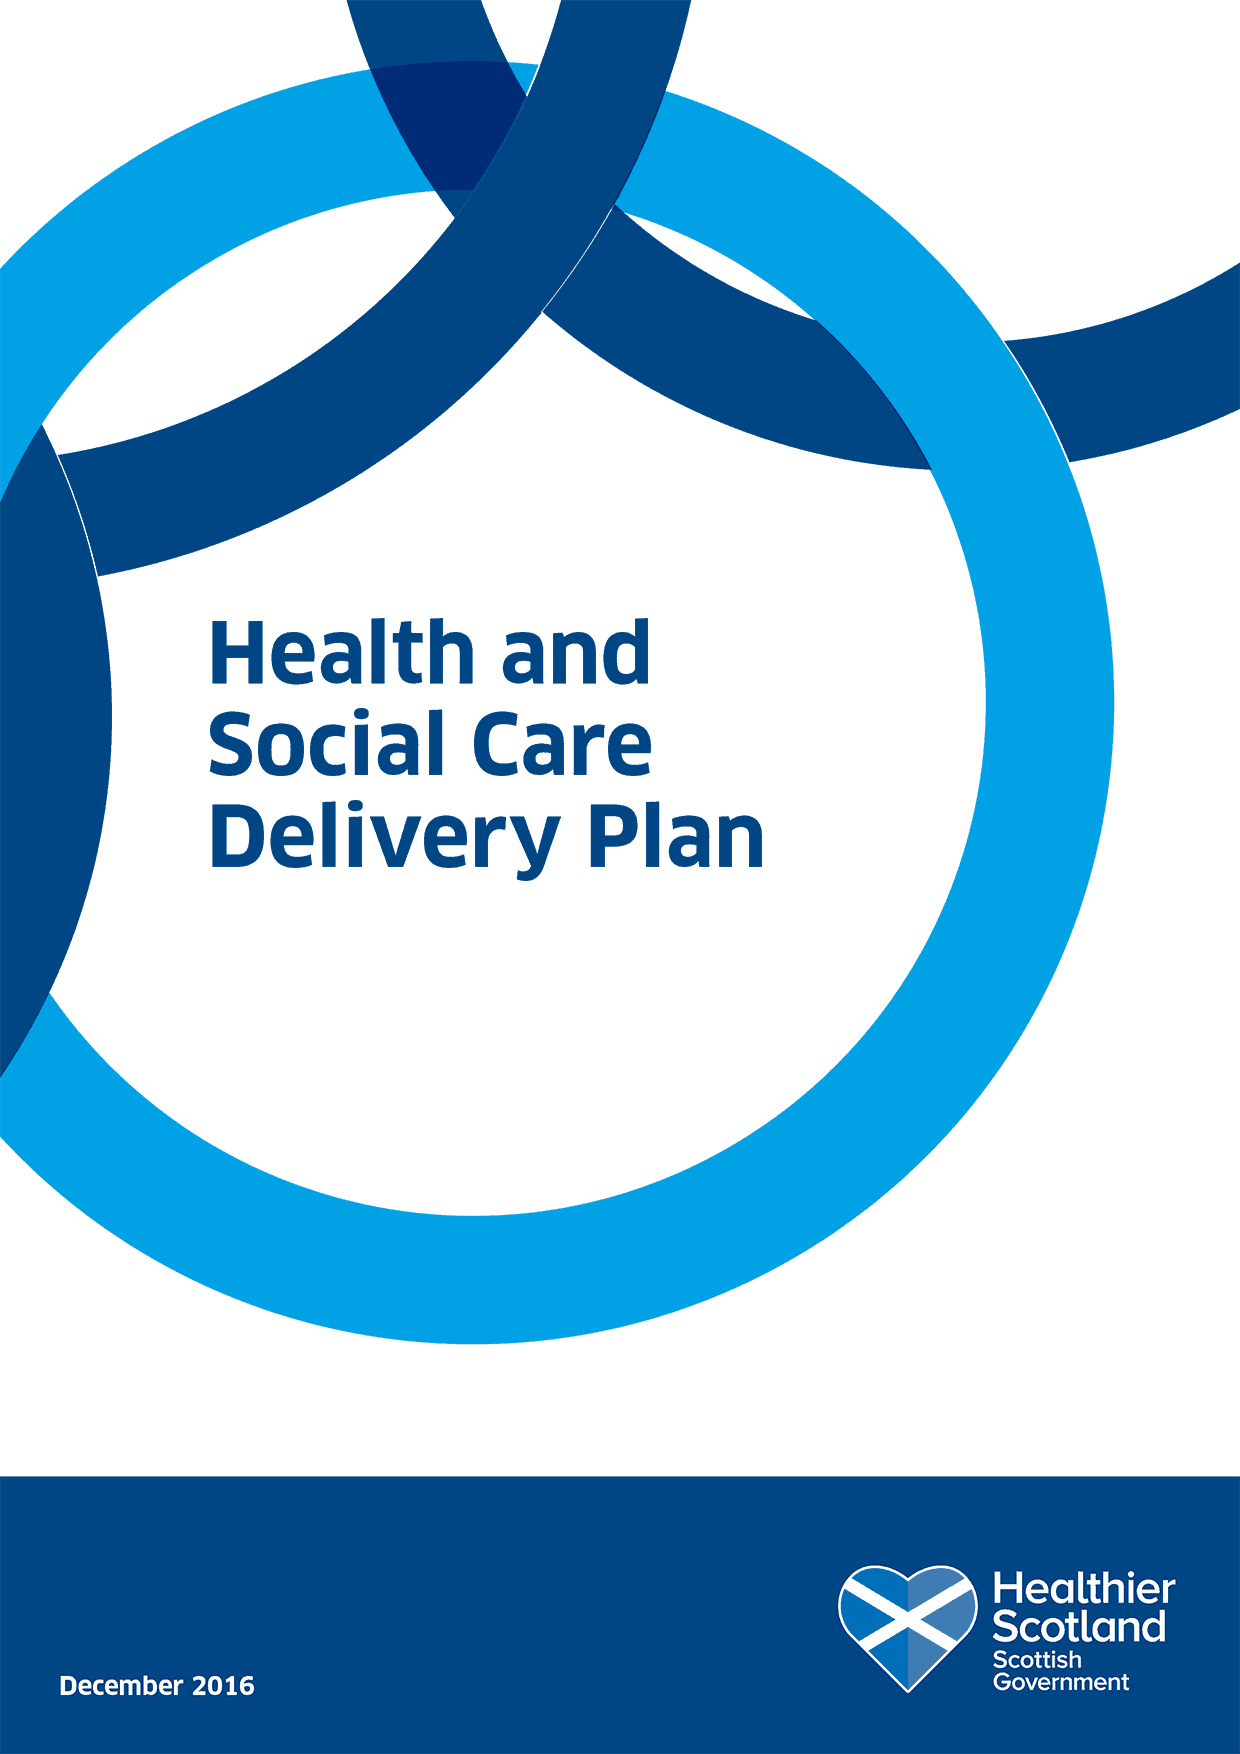 Health and Social Care Delivery Plan – A Healthier Scotland